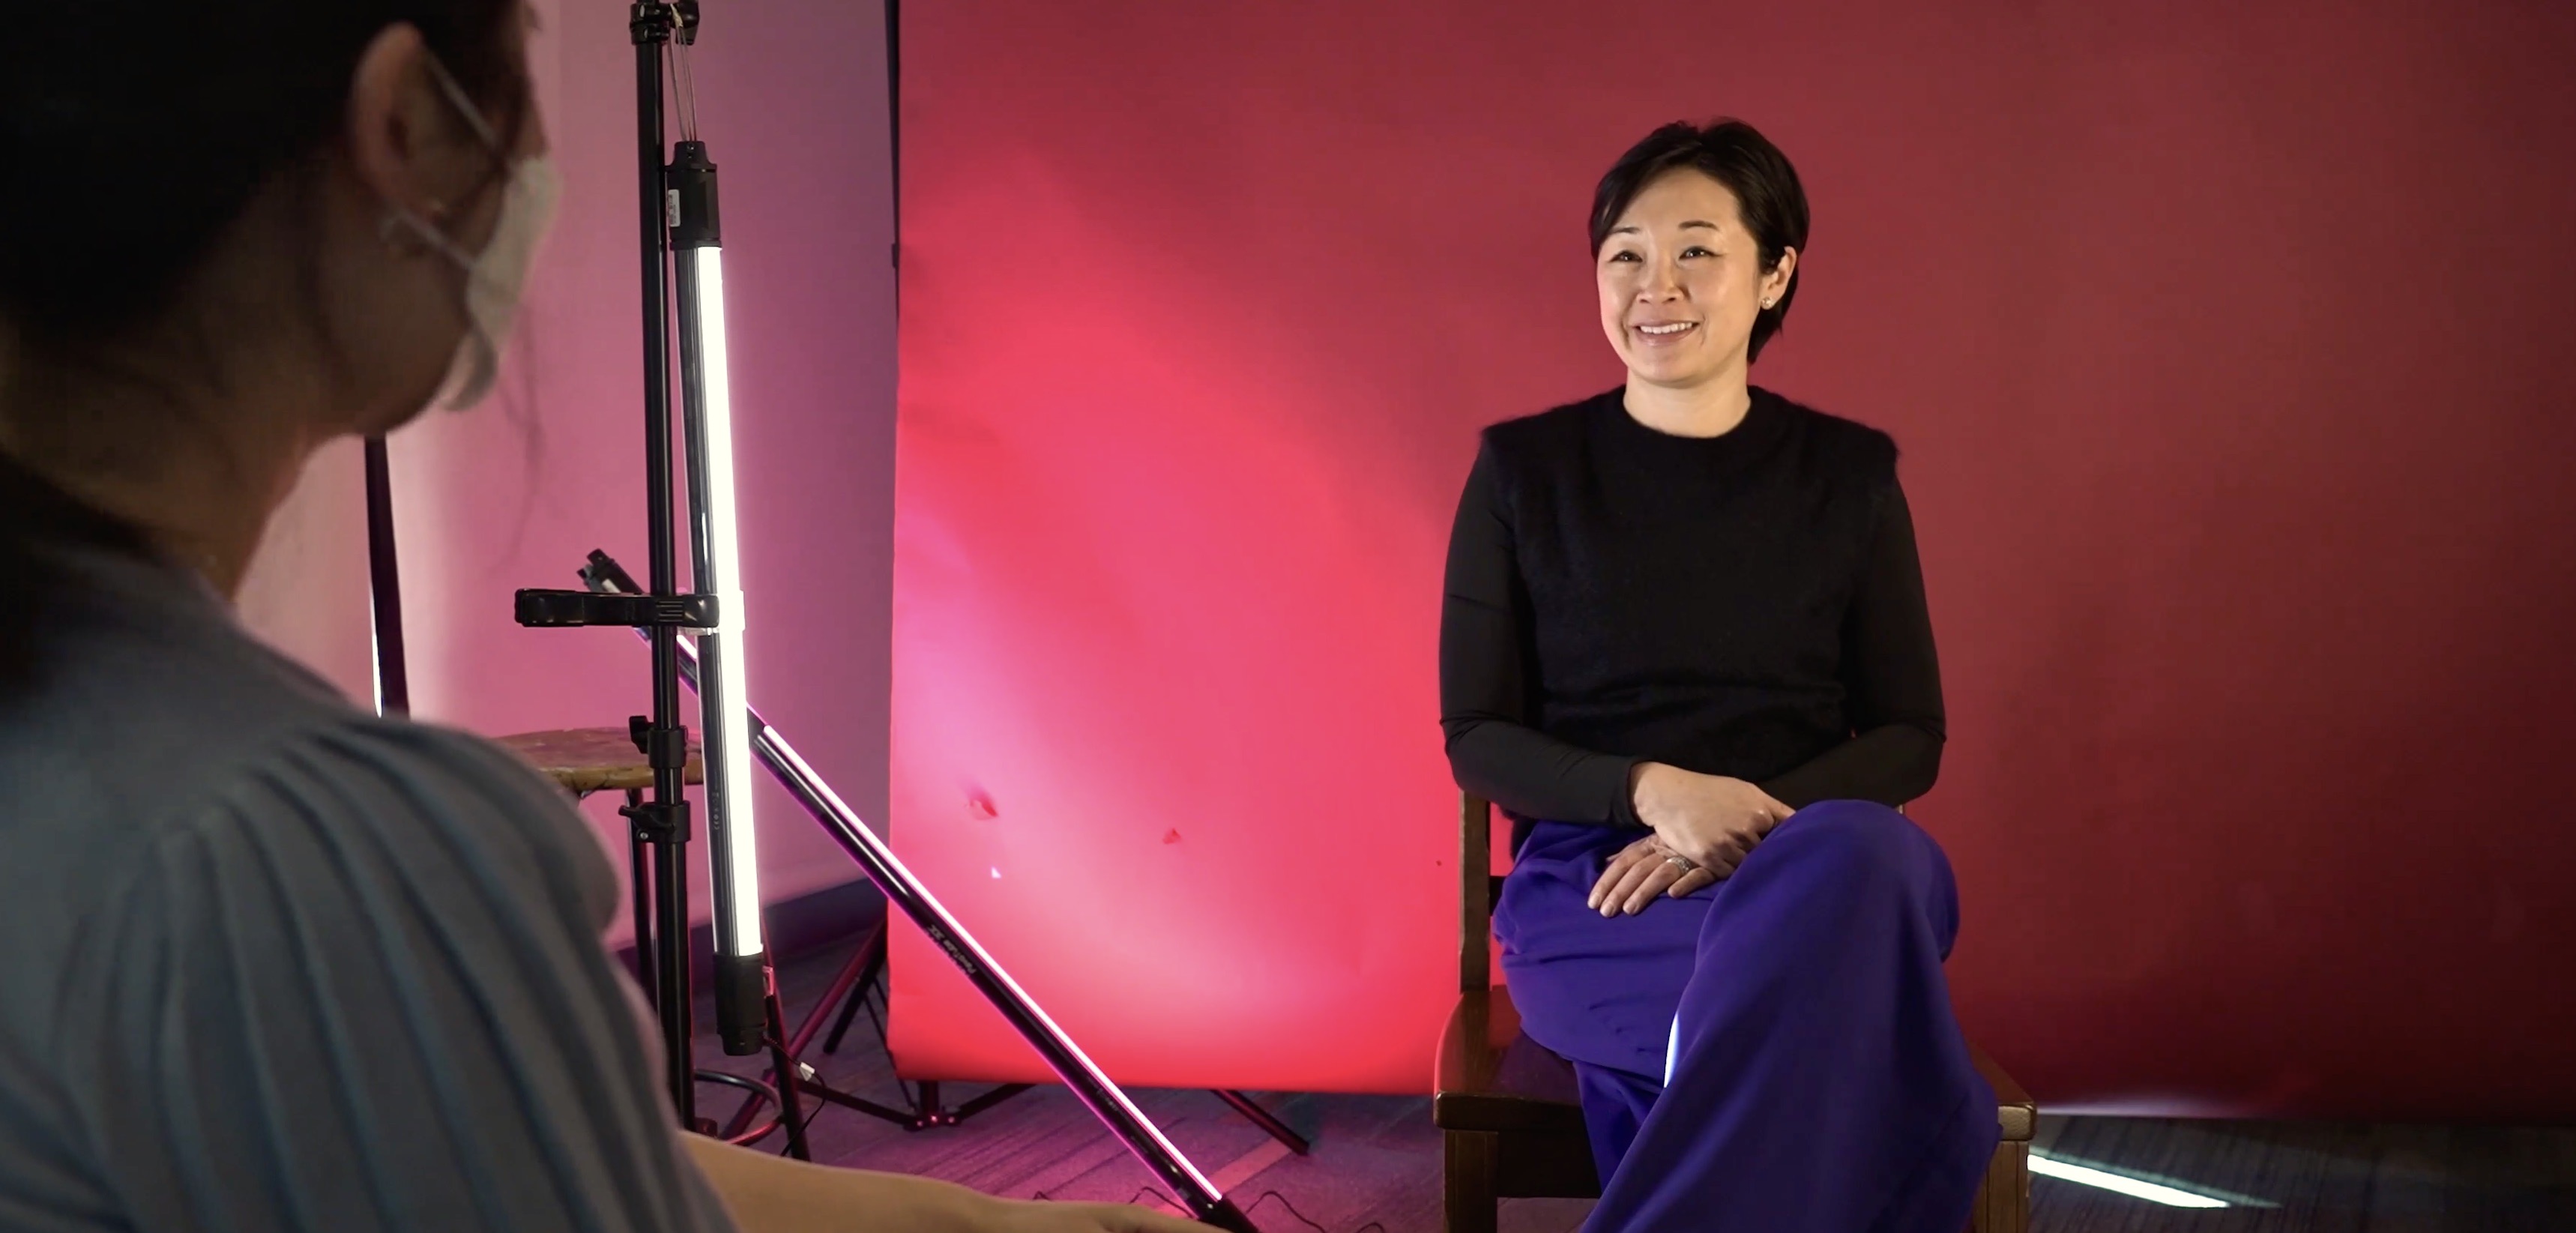 An Asian woman smiles against a fuchsia backdrop while speaking to another person.